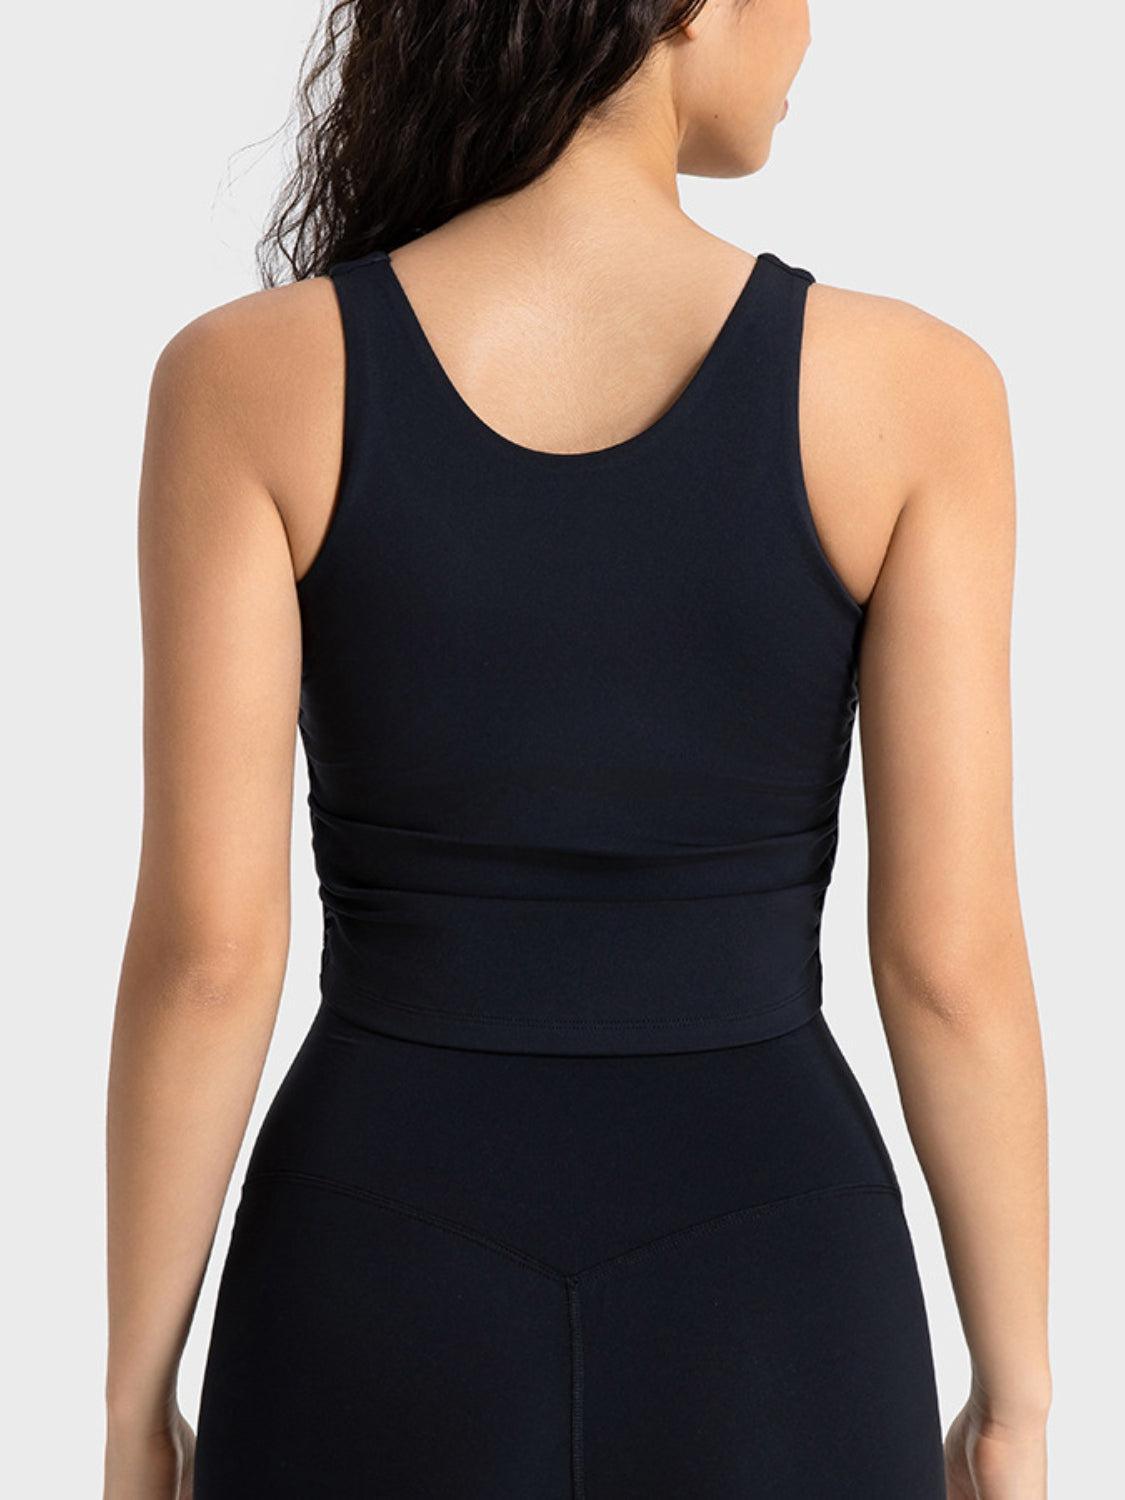 the back of a woman wearing a black bodysuit